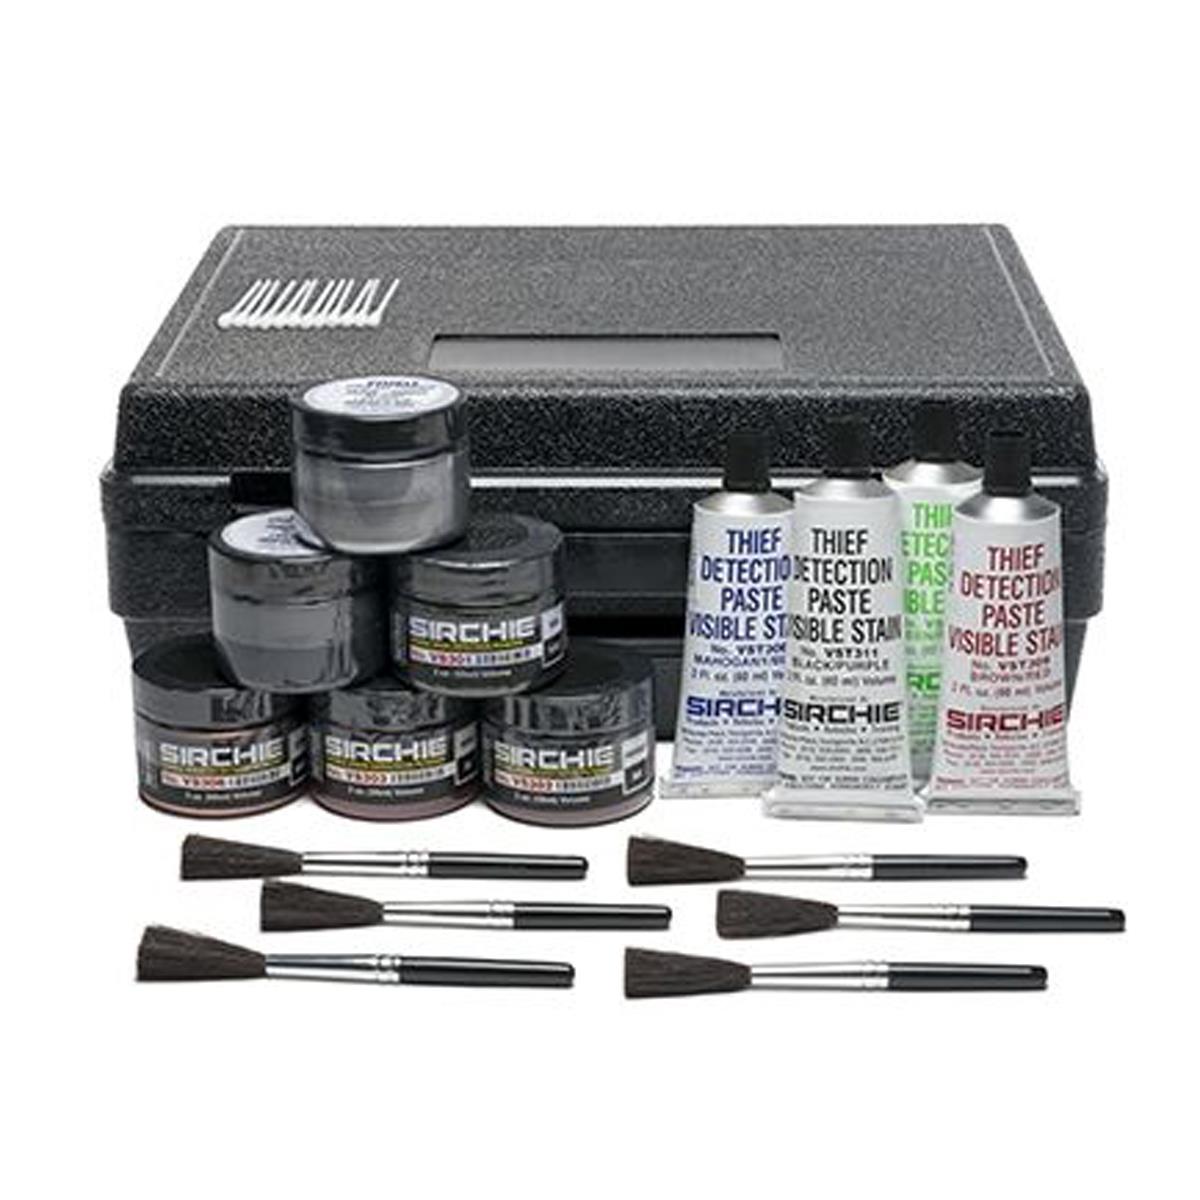 Image of Sirchie Master Visible Stain Detection Kit